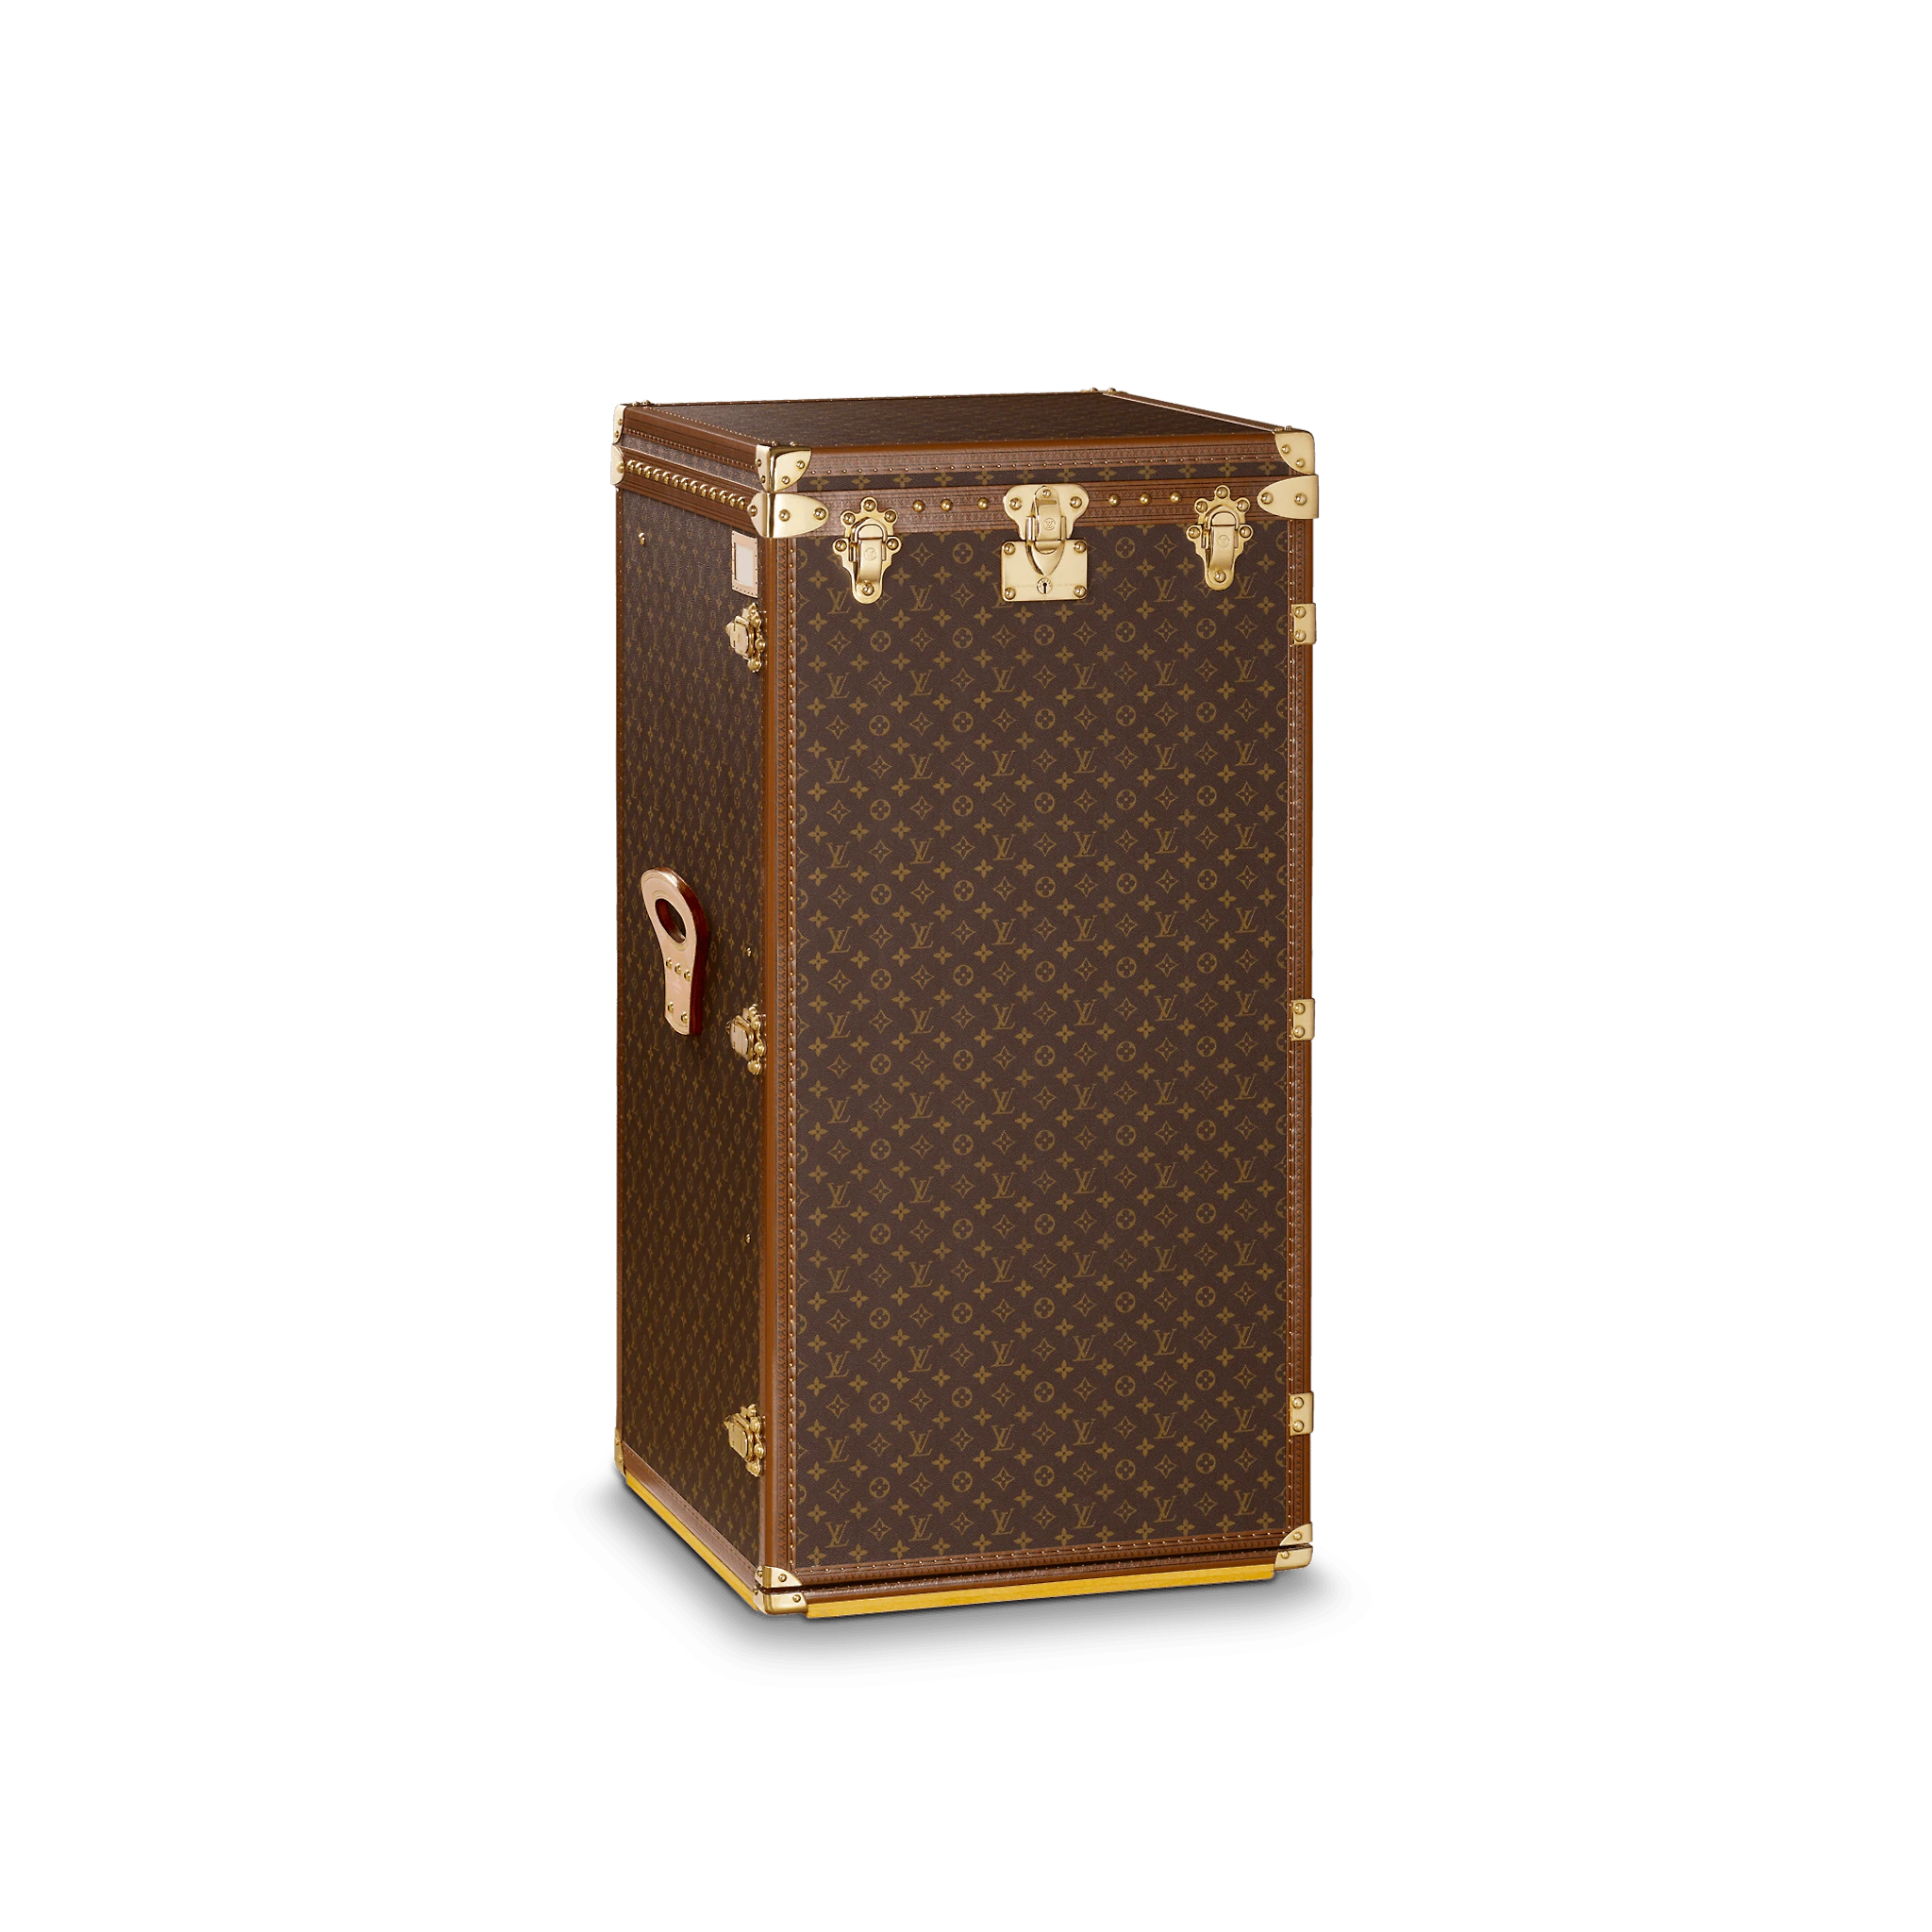 Go All In At Poker Night With Louis Vuitton's $242,000 Casino Trunk